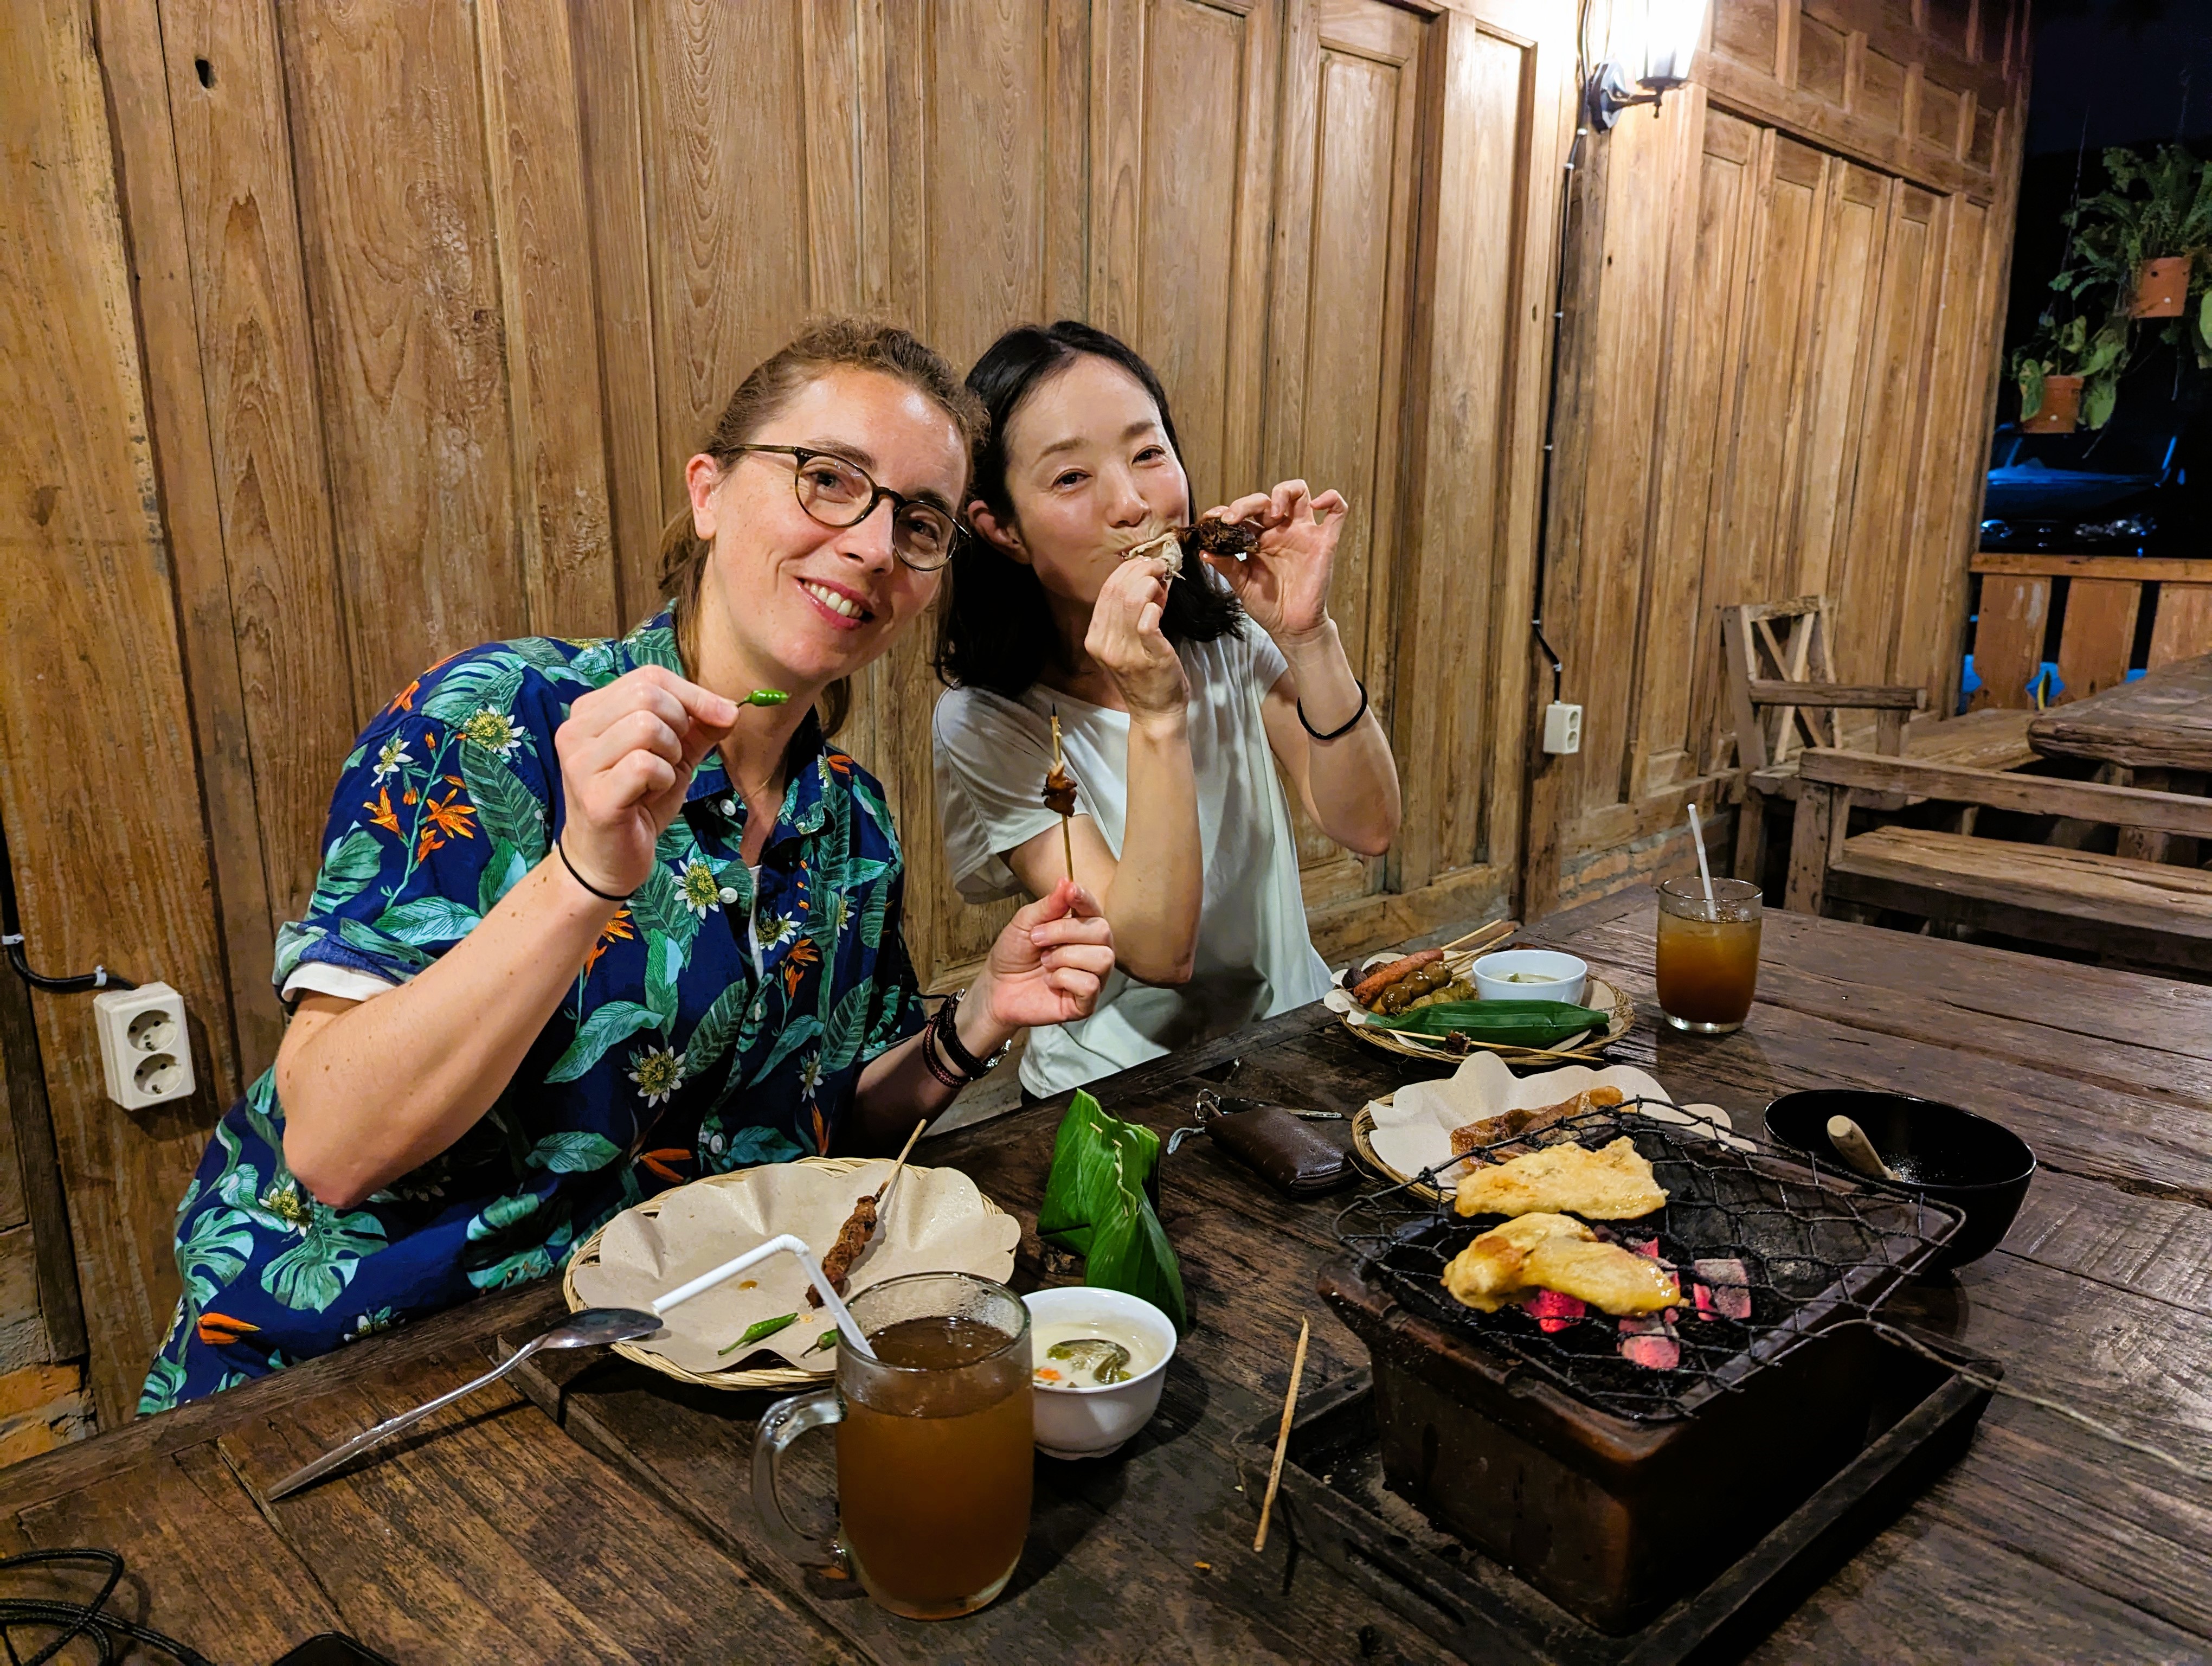 Isabel of Elrha and Ikue of ADRRN are eating traditional grilled food